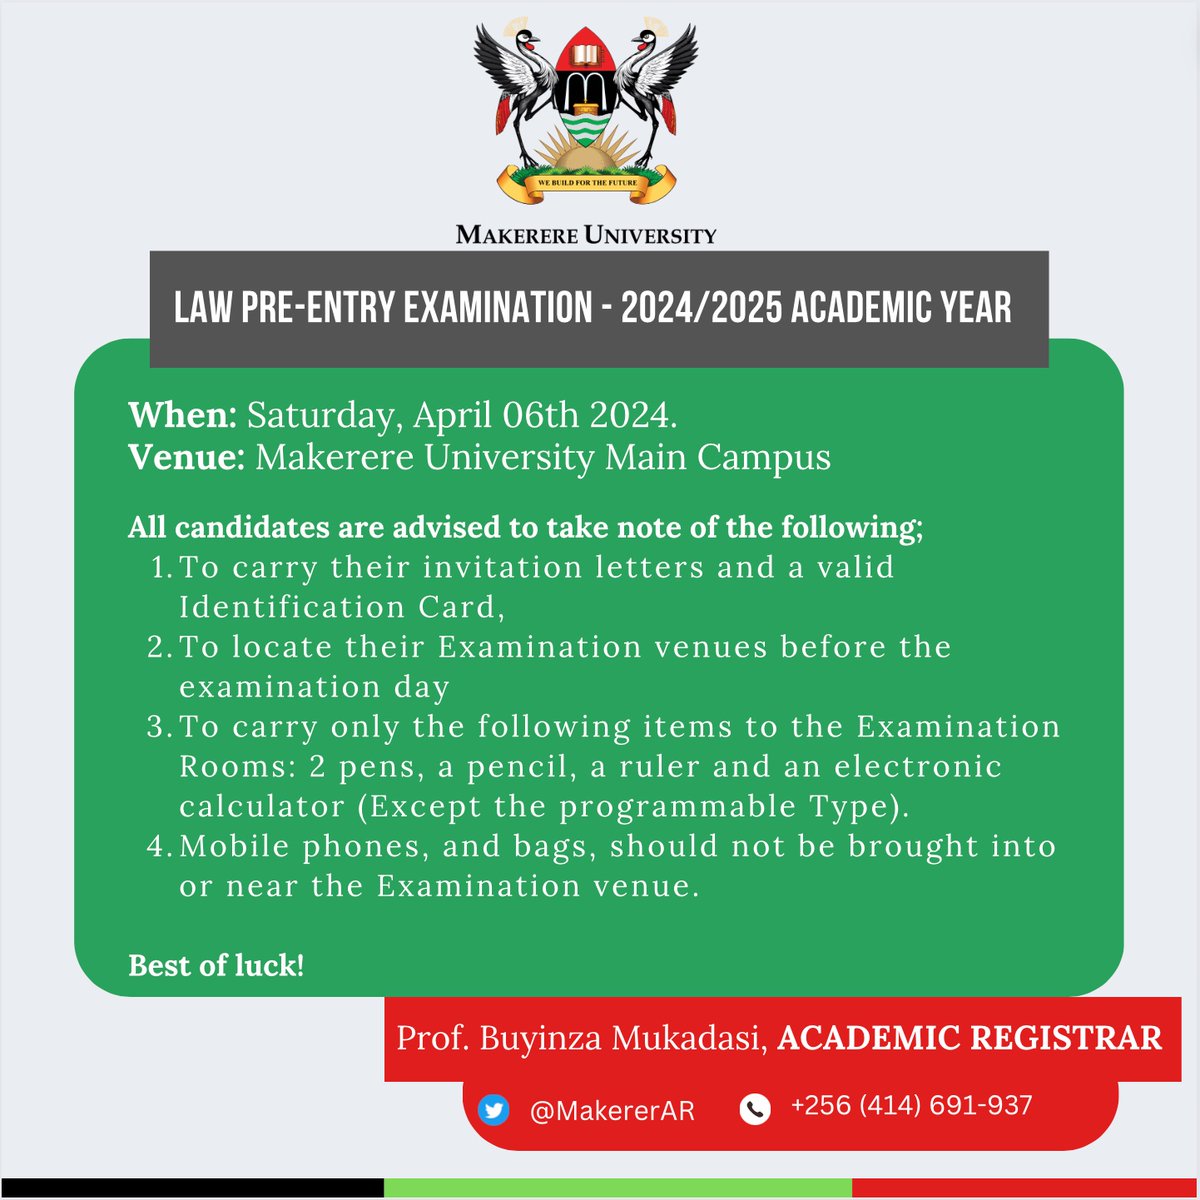 📌COURTESY REMINDER!! What: Law Pre-Entry Examination - 2024/2025 When: Tomorrow Saturday April, 06th 2024. Time: 7:30 am. Please take note of👇 @DICTSMakerere @BUYINZAMUKADAS1 @MajangaOchwo @MakerereNews @Makerere @MajangaOchwo @MakEndowmentFnd @MakGuild @26guild